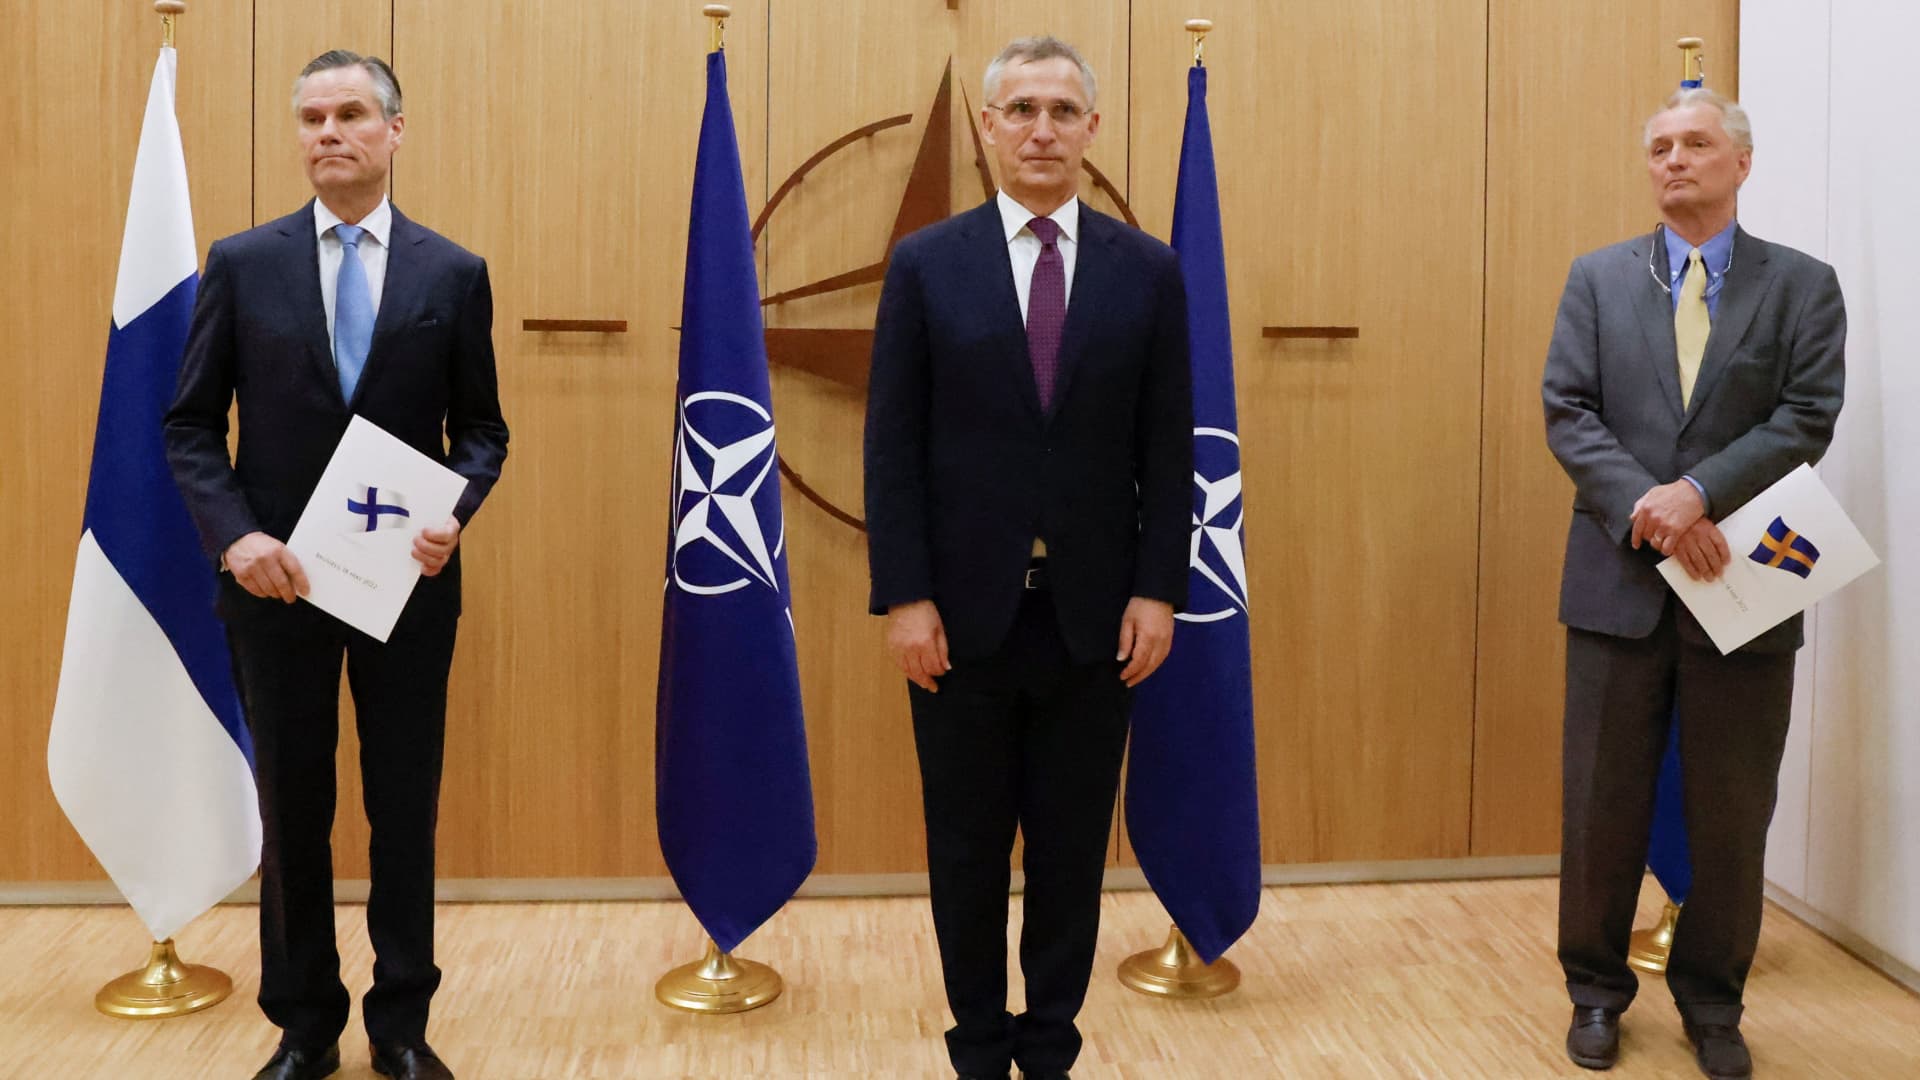 Finland's Ambassador to NATO Klaus Korhonen, NATO Secretary-General Jens Stoltenberg and Sweden's Ambassador to NATO Axel Wernhoff attend a ceremony to mark Sweden's and Finland's application for membership in Brussels, Belgium, May 18, 2022.